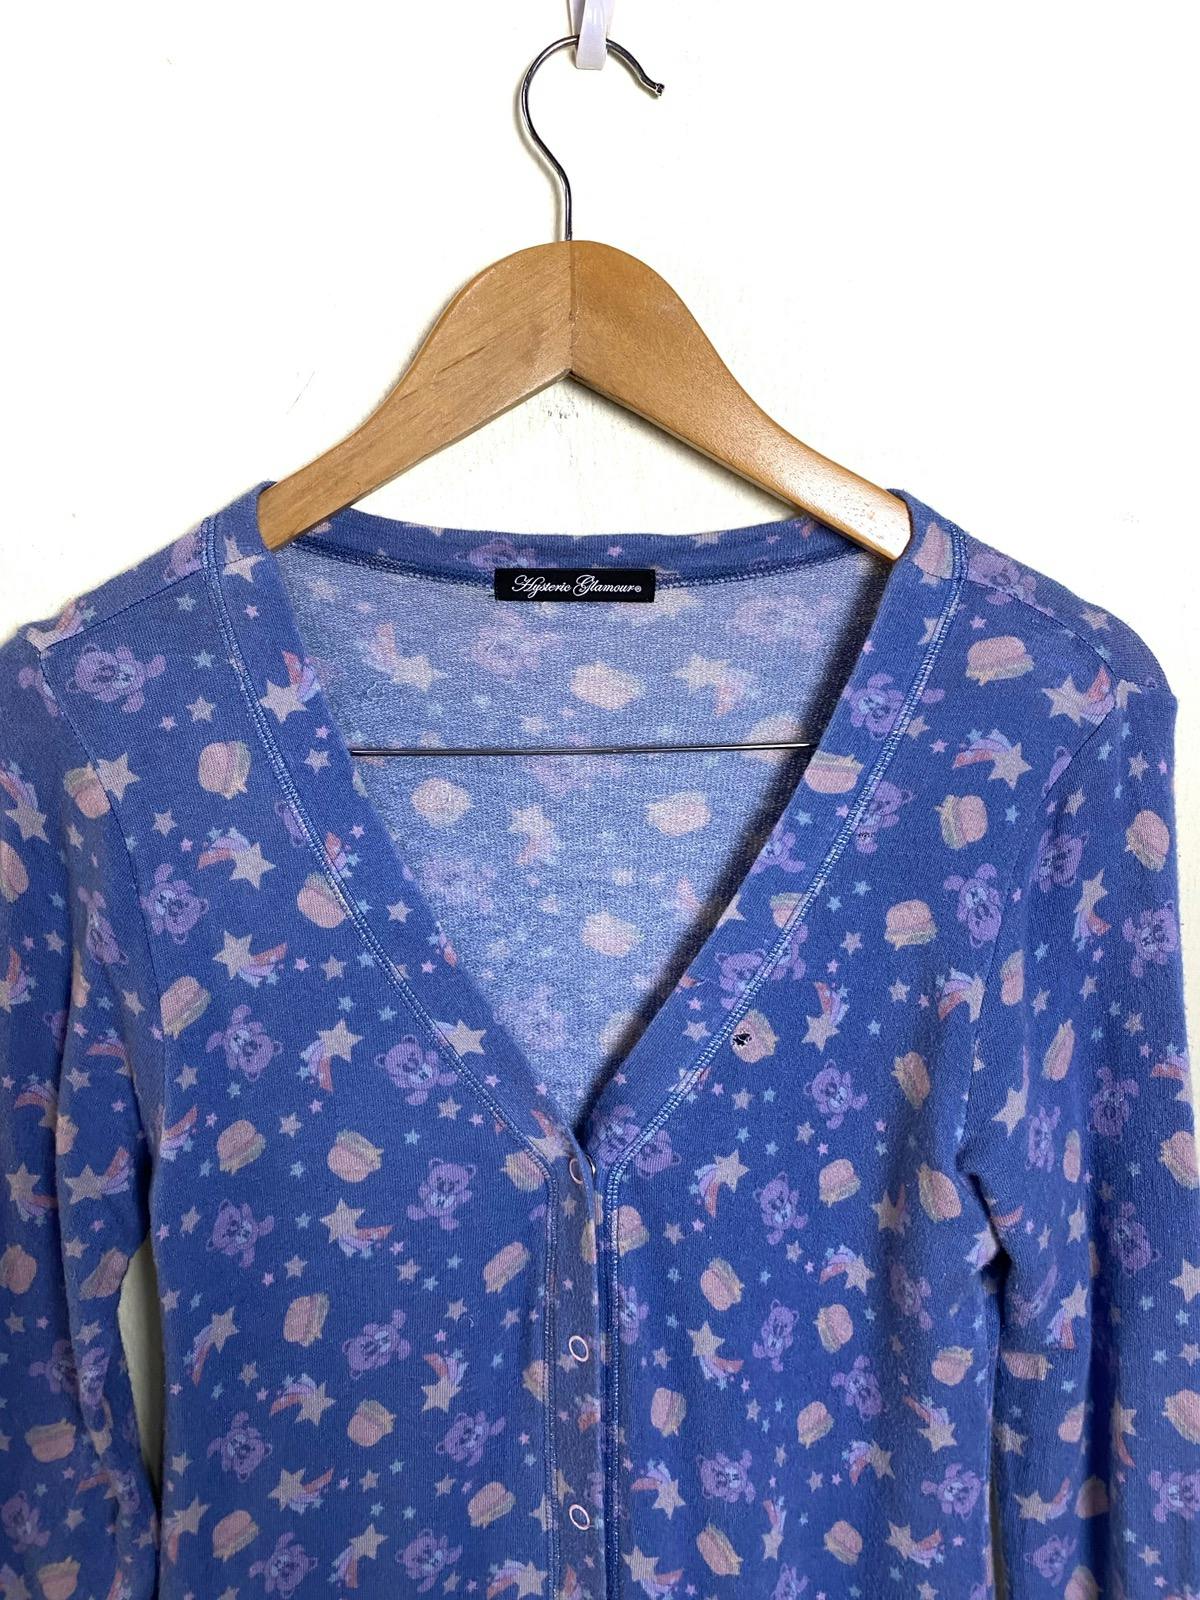 Vintage Hysteric Glamour Cardigan - 2